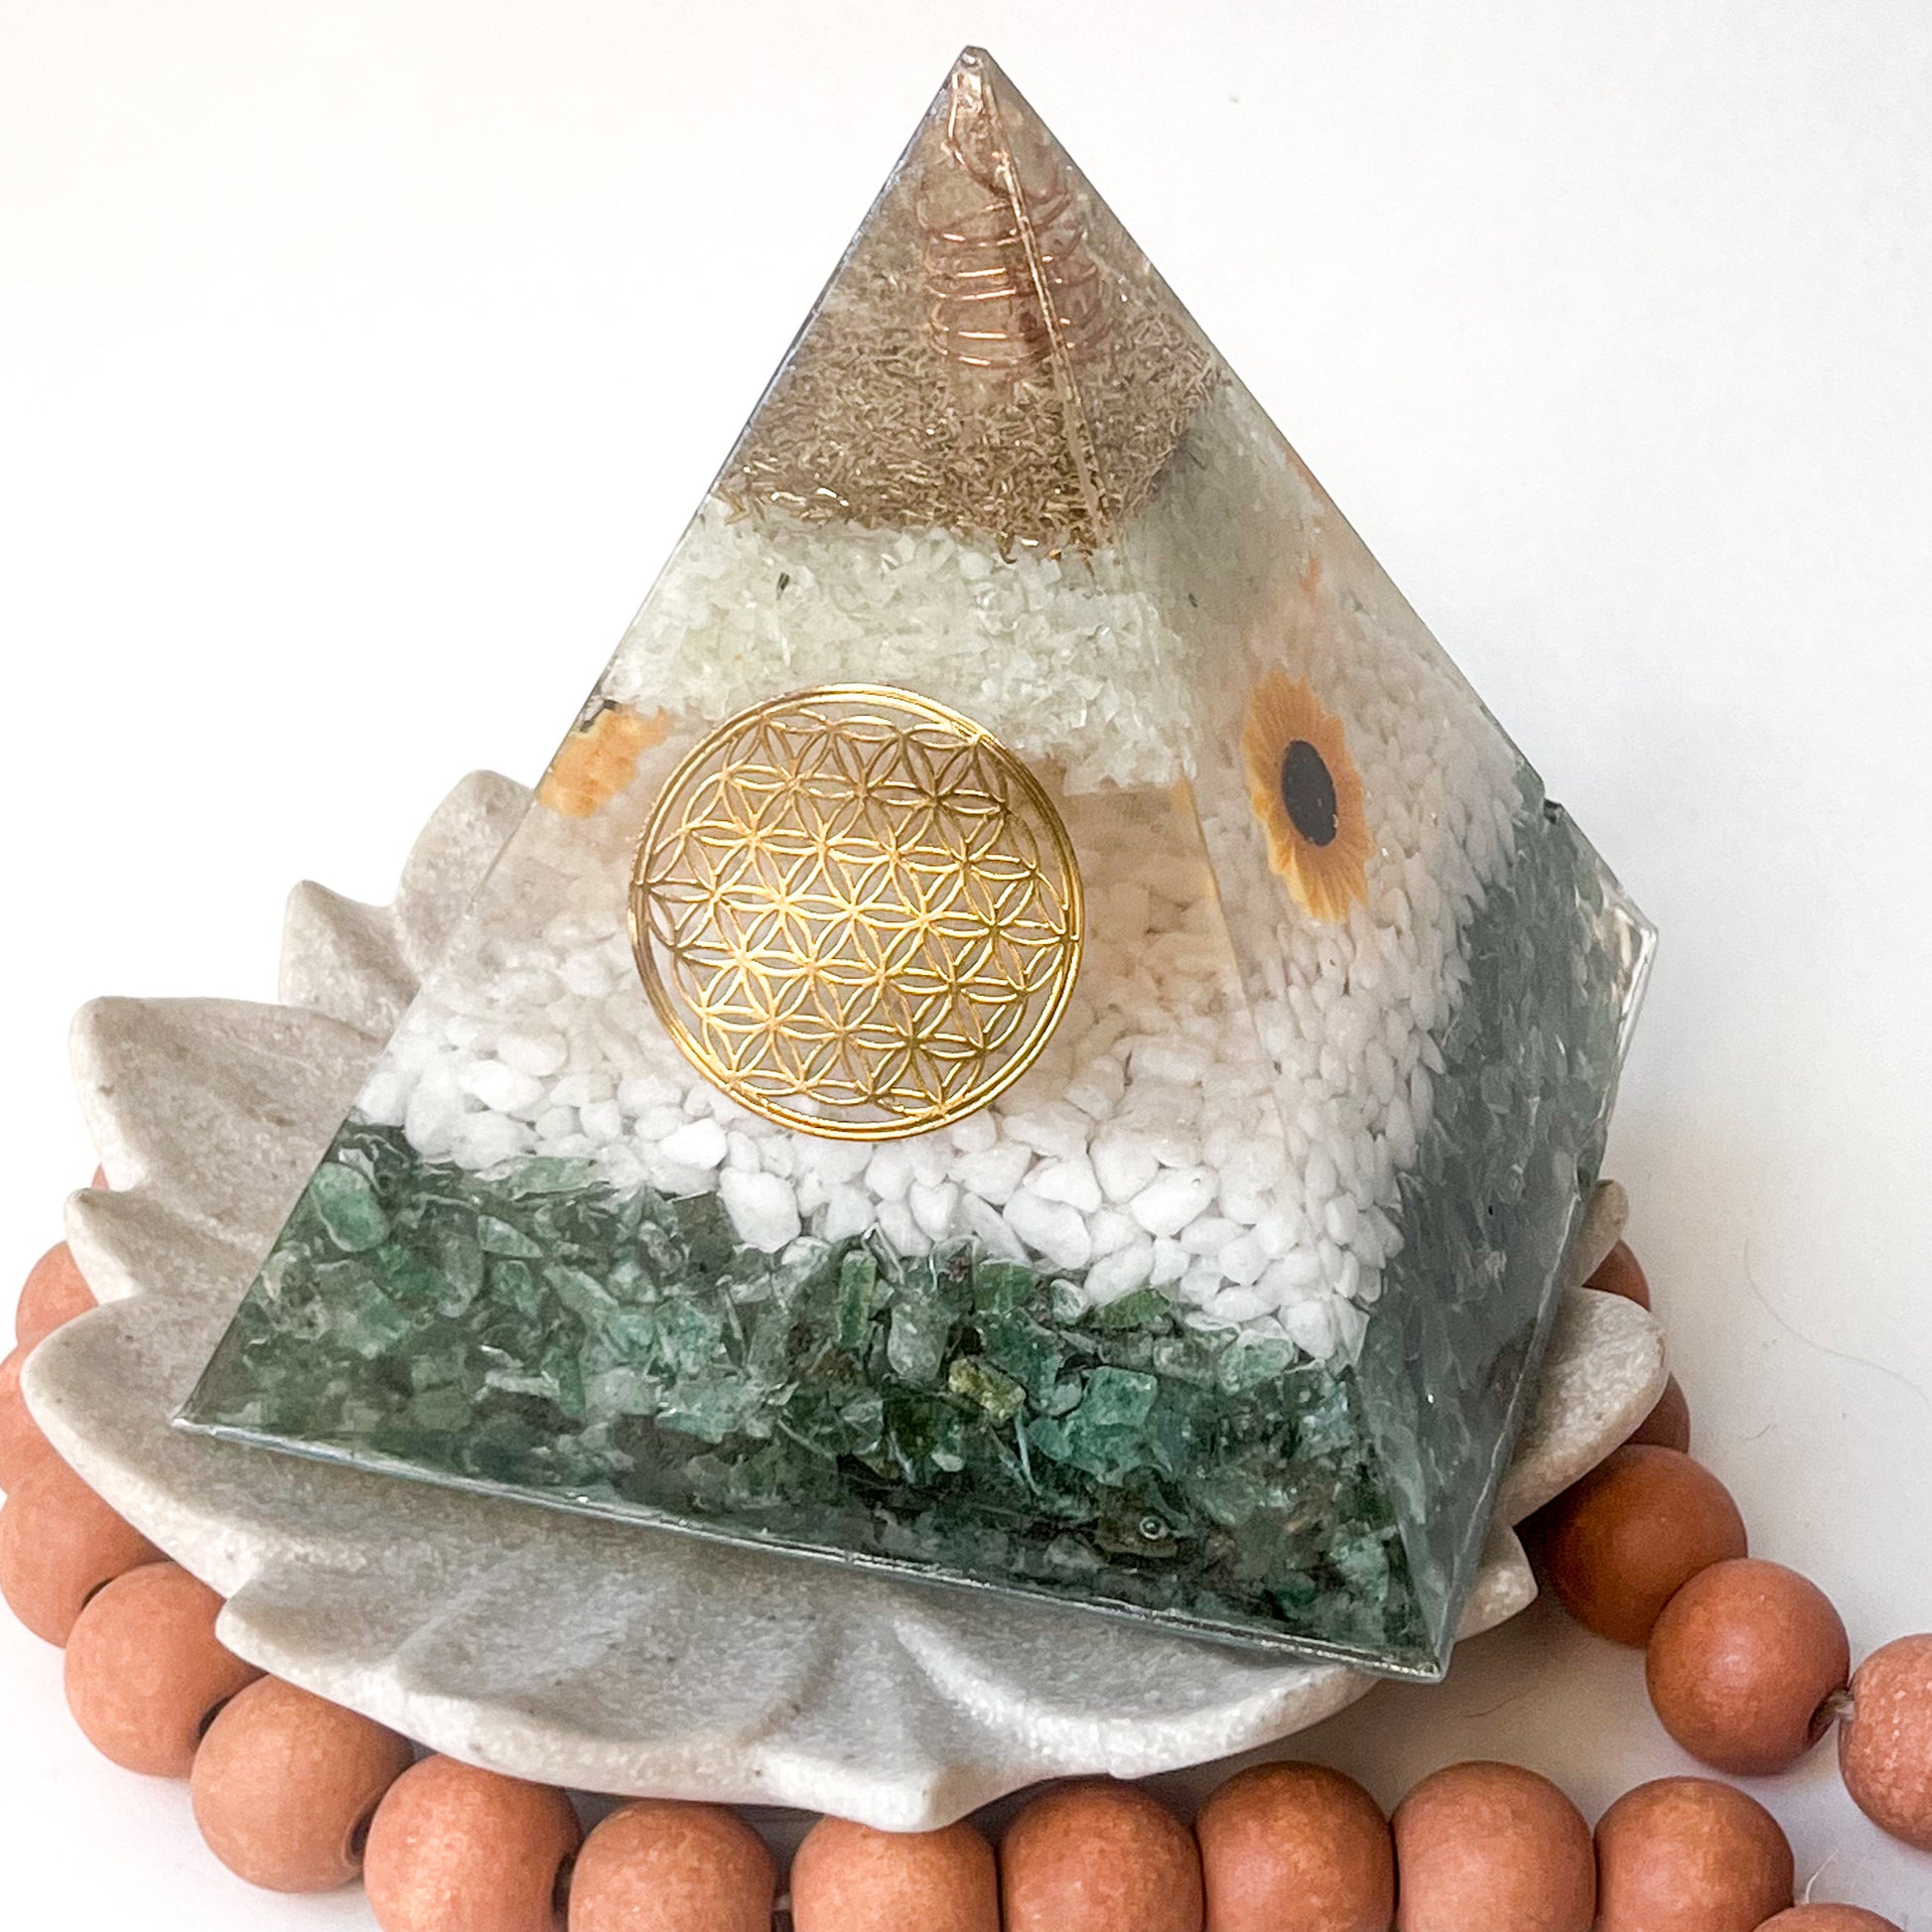 Colorful orgonite pyramid with sacred geometry design for spiritual growth and harmony